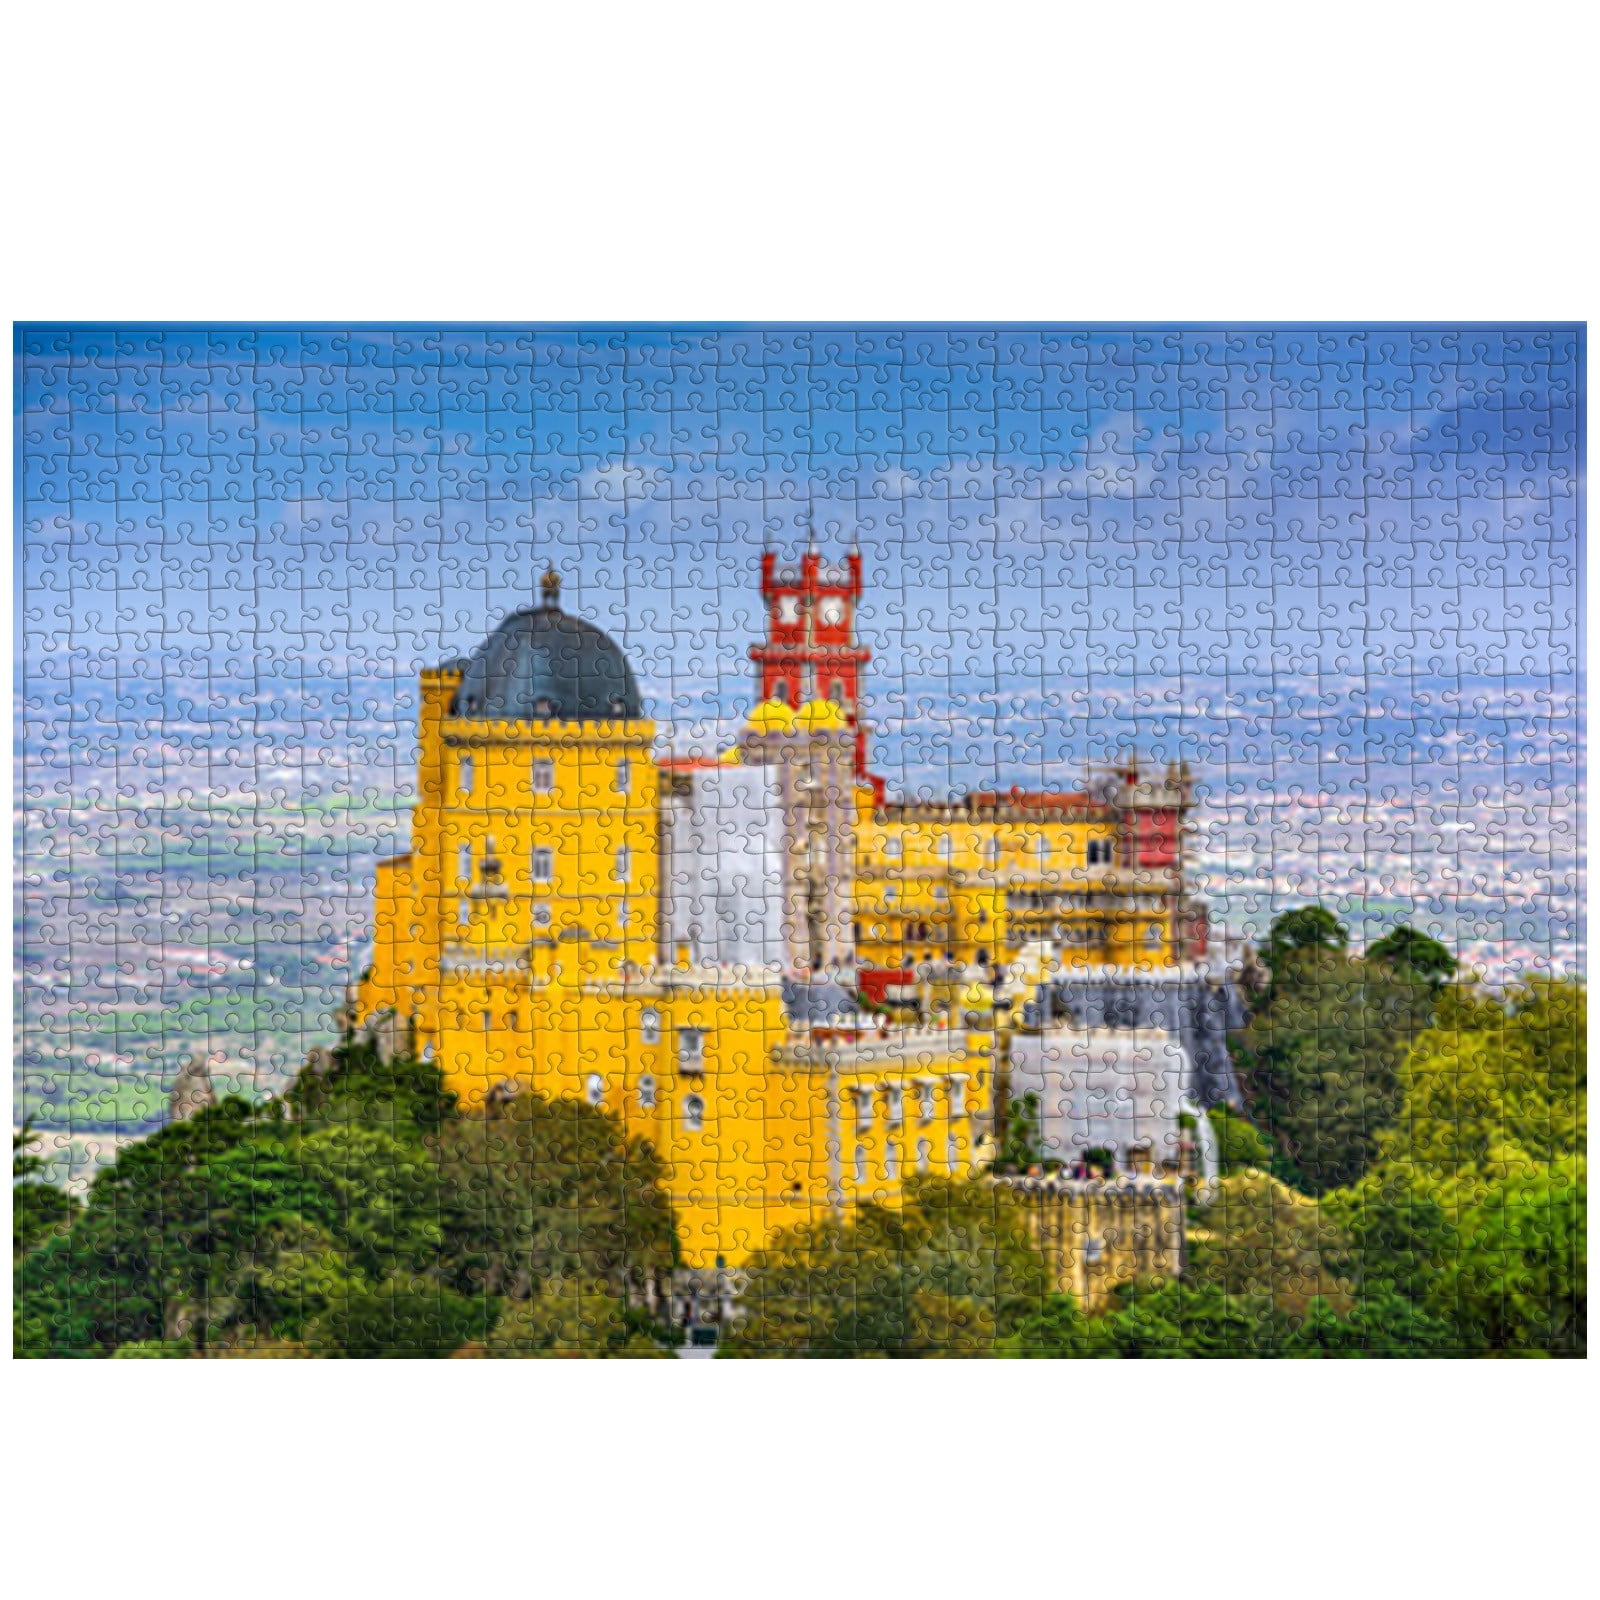 Henrys Old Time Store 300 Piece Jigsaw Puzzle for Adults 300 pc Americana Style Jigsaw by Artist Kay Lamb Shannon Bits and Pieces